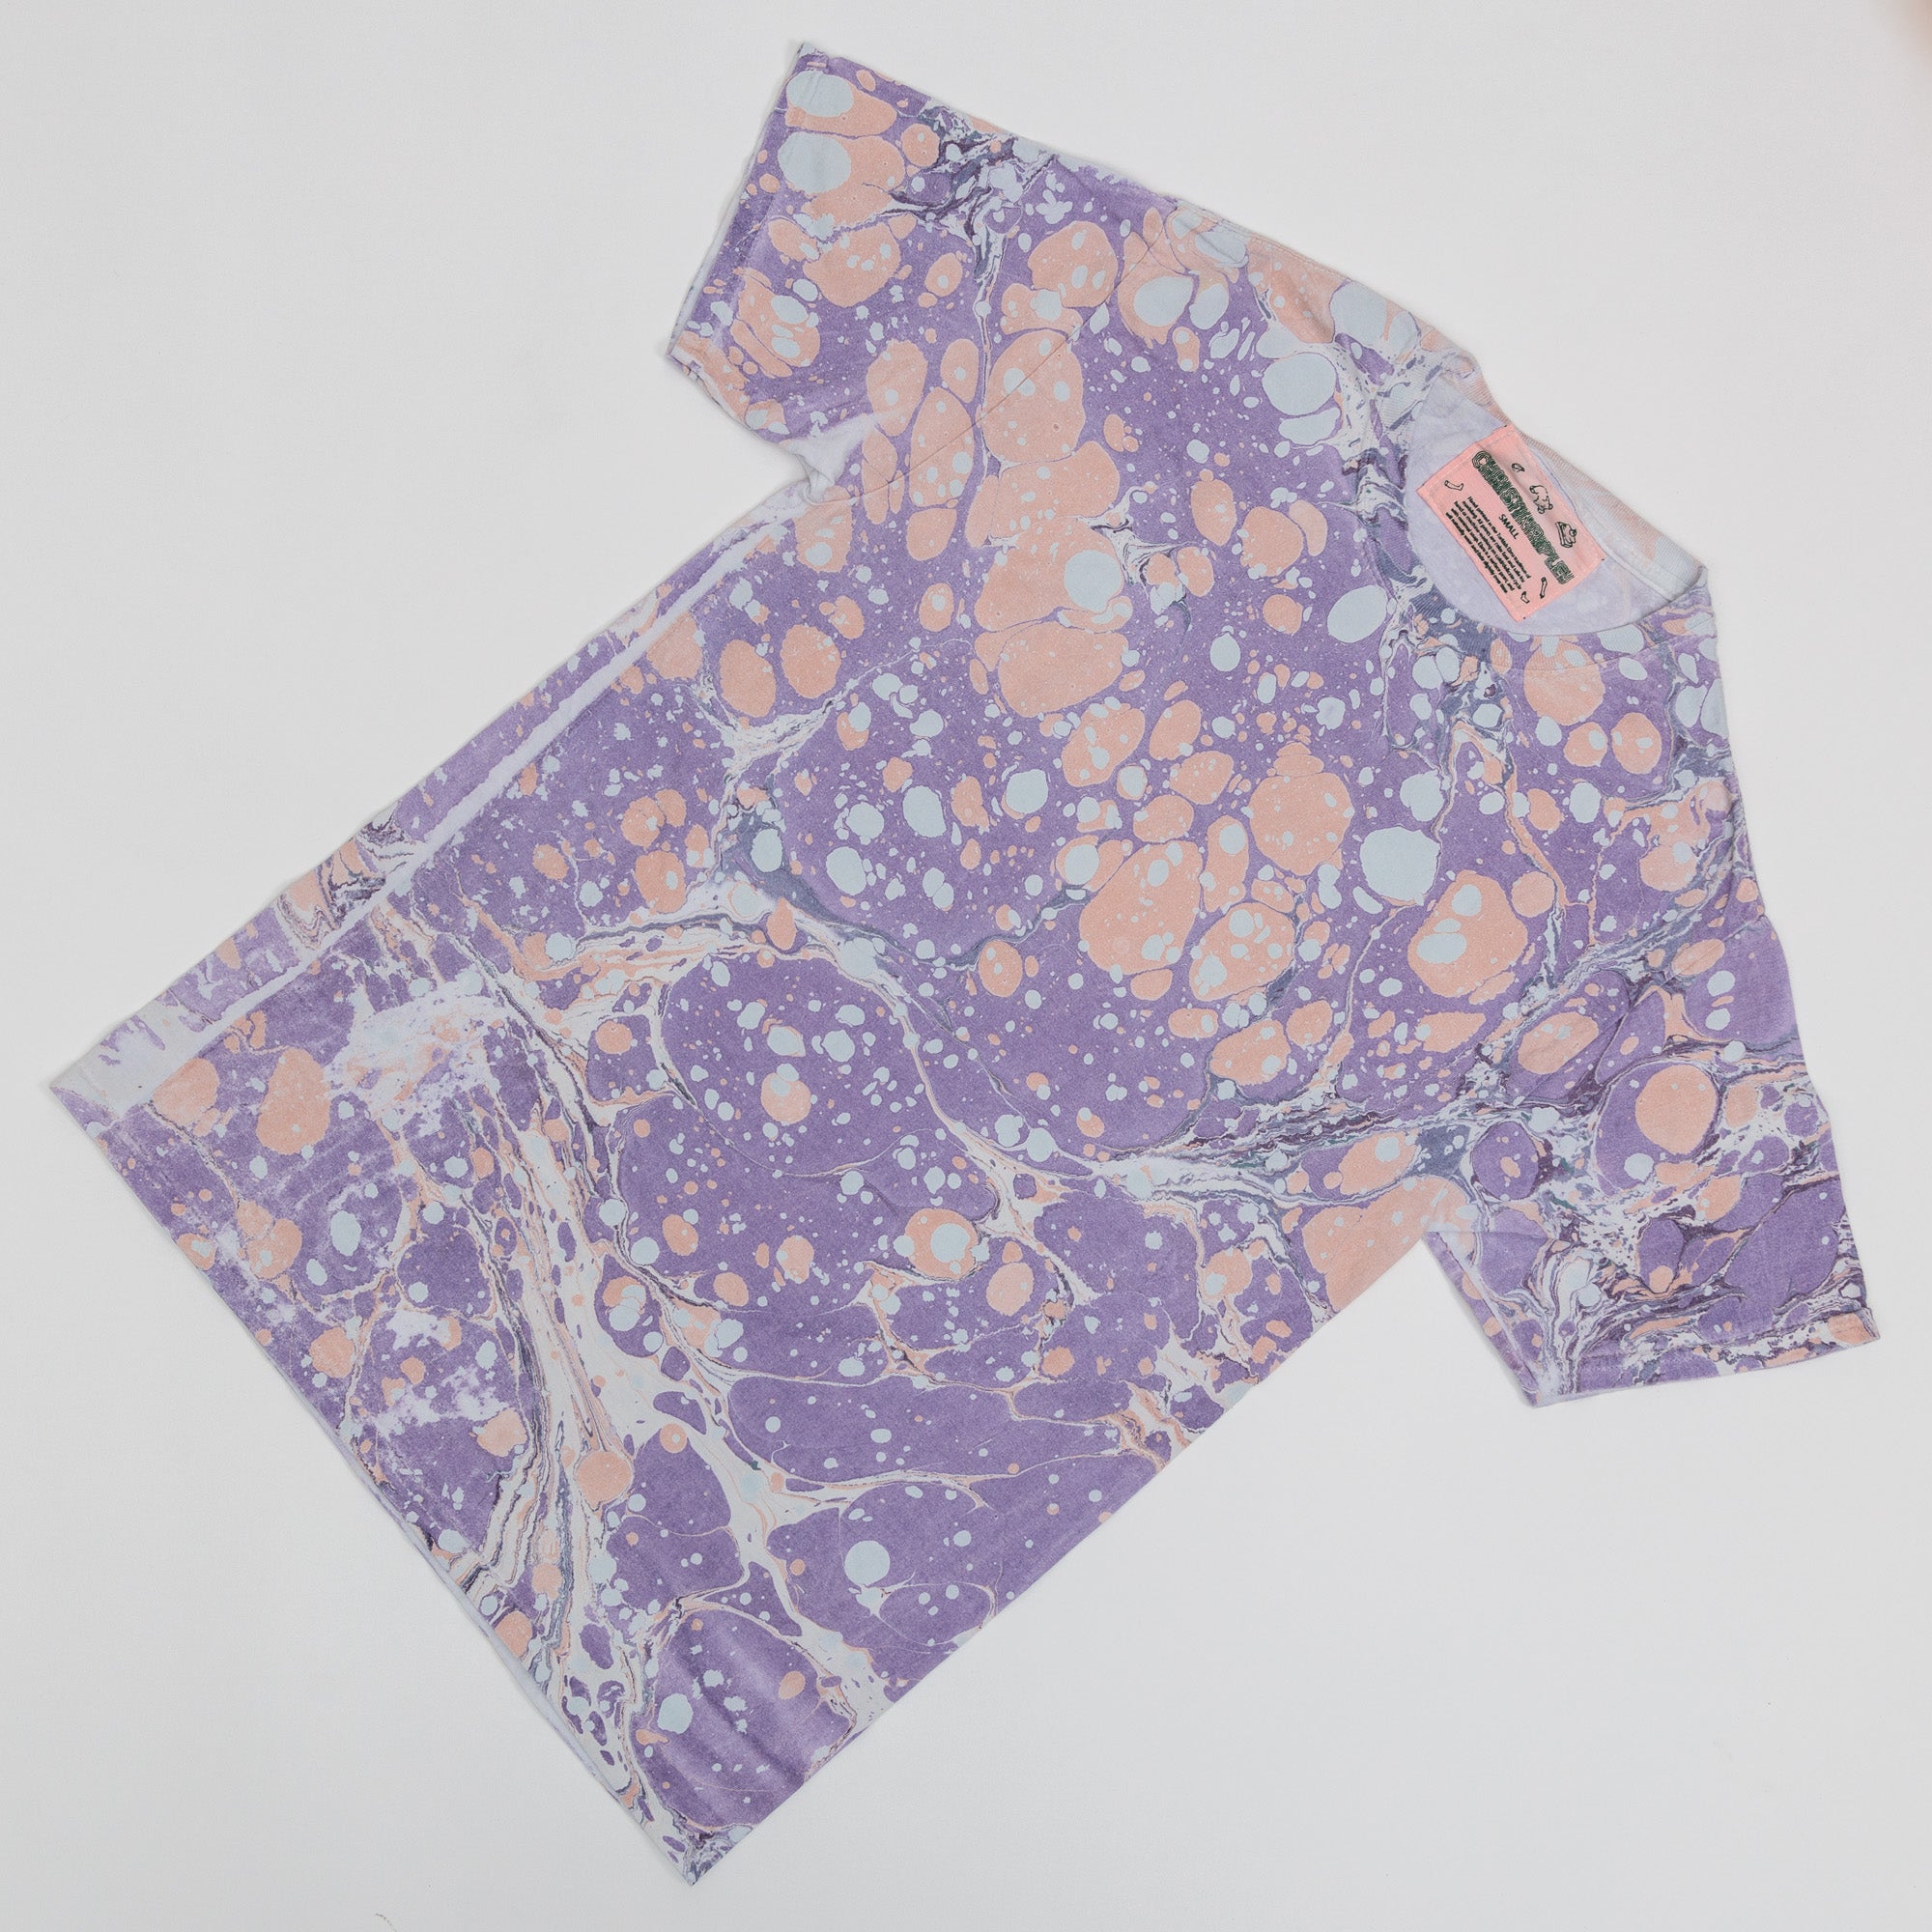 MARBLED T-SHIRT - Adult Small